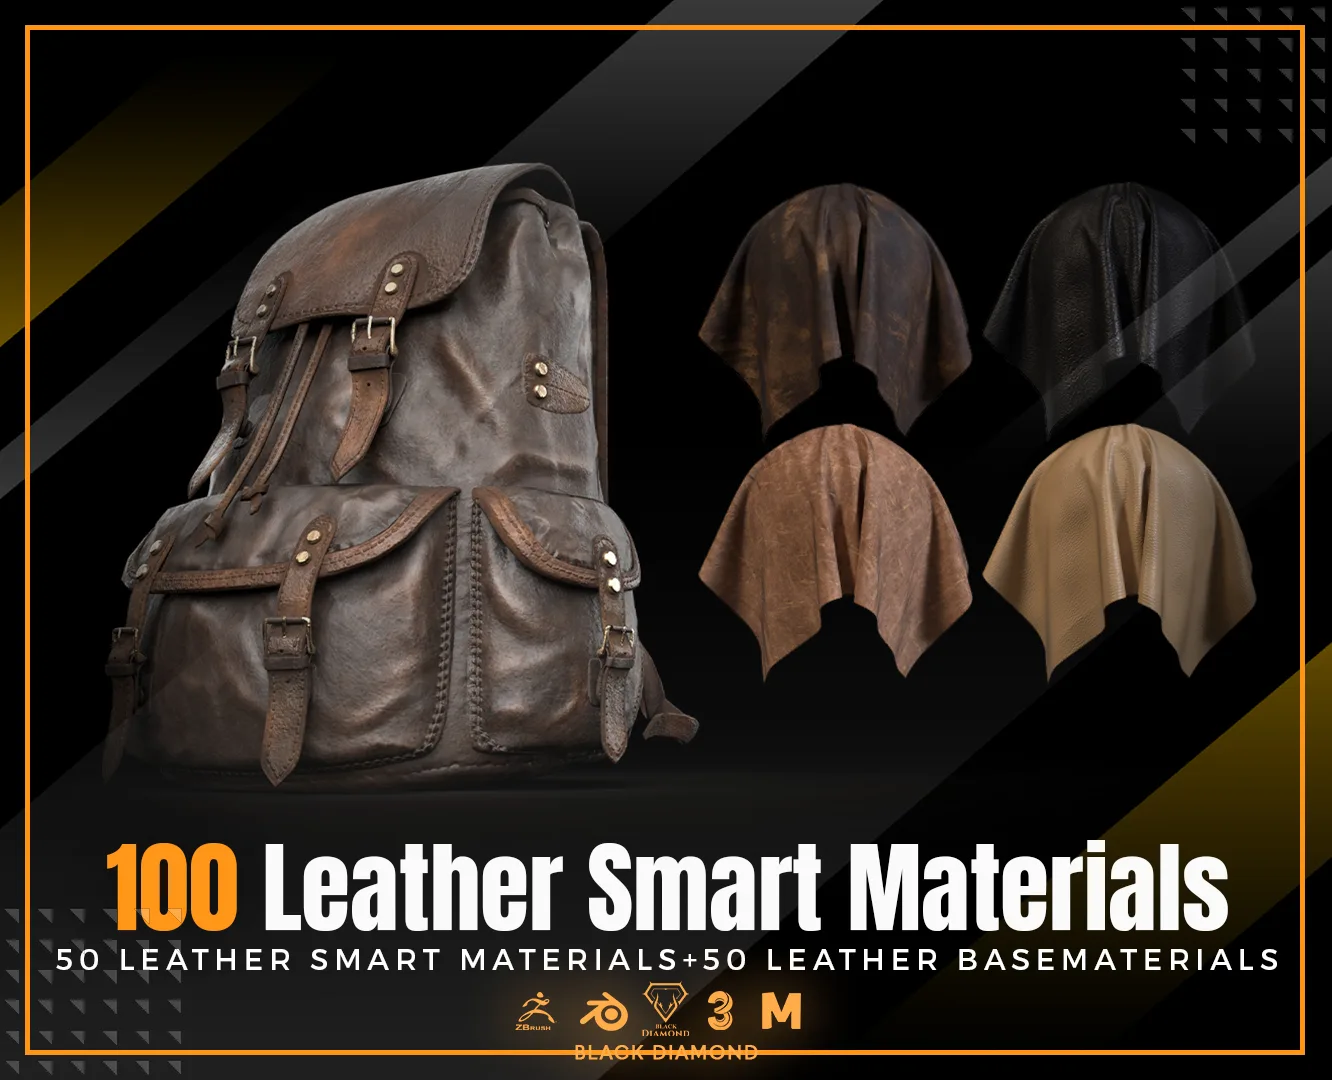 100 Leather Smart Materials with high details